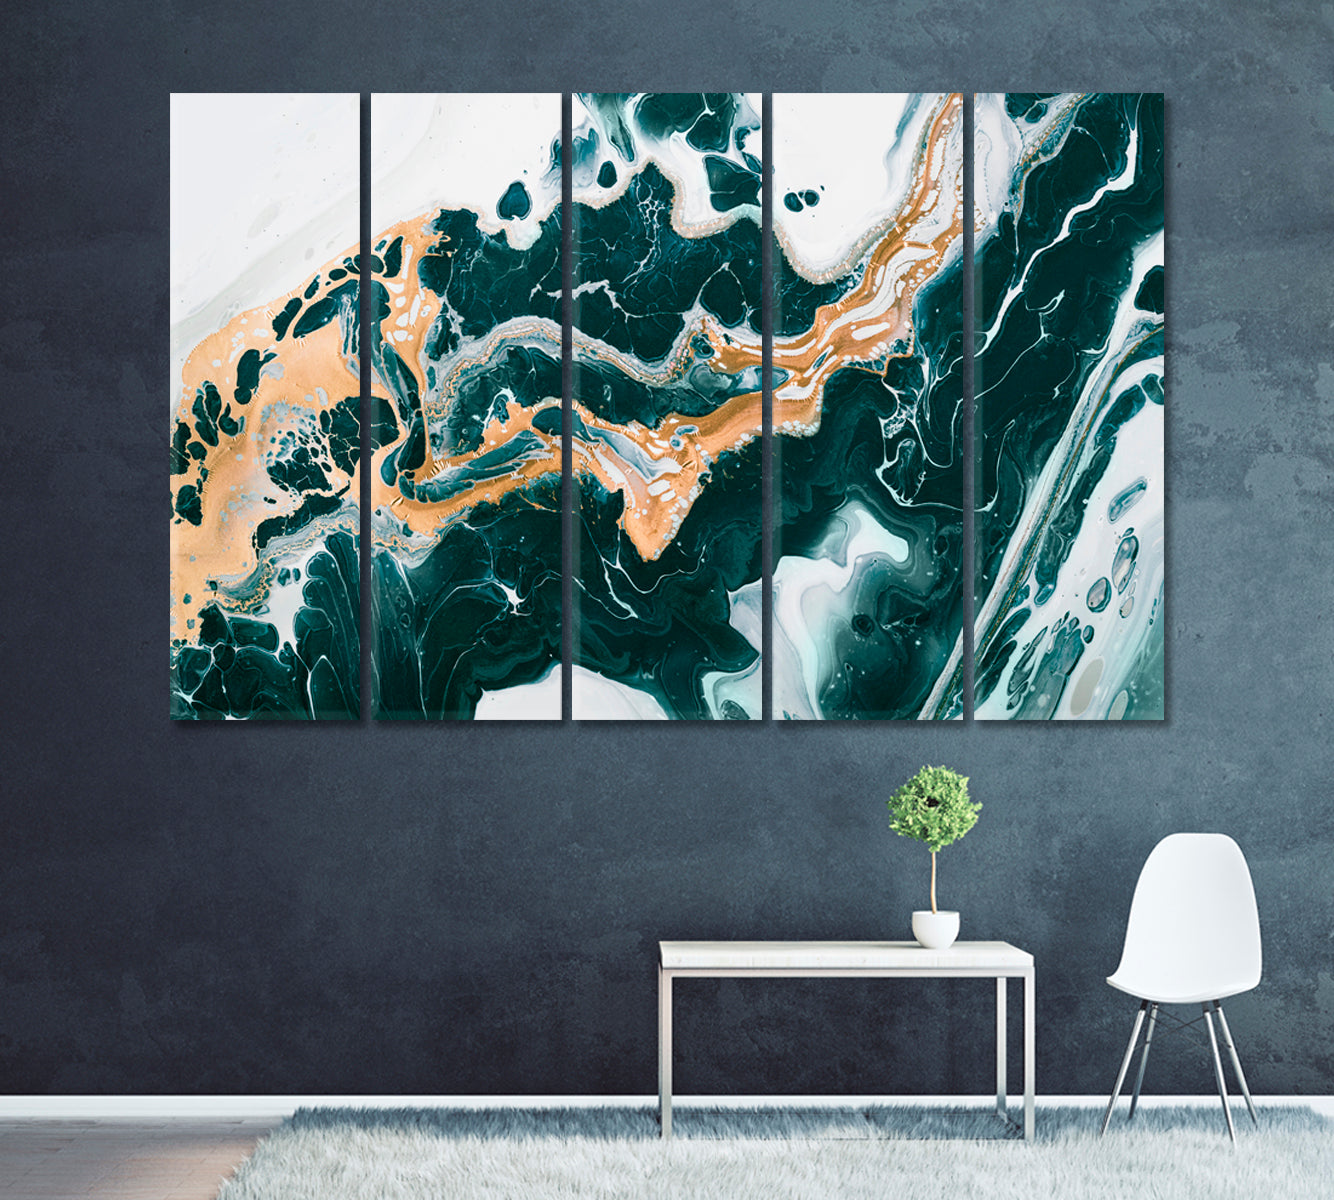 Liquid Green Abstract Wavy Marble Canvas Print ArtLexy 5 Panels 36"x24" inches 